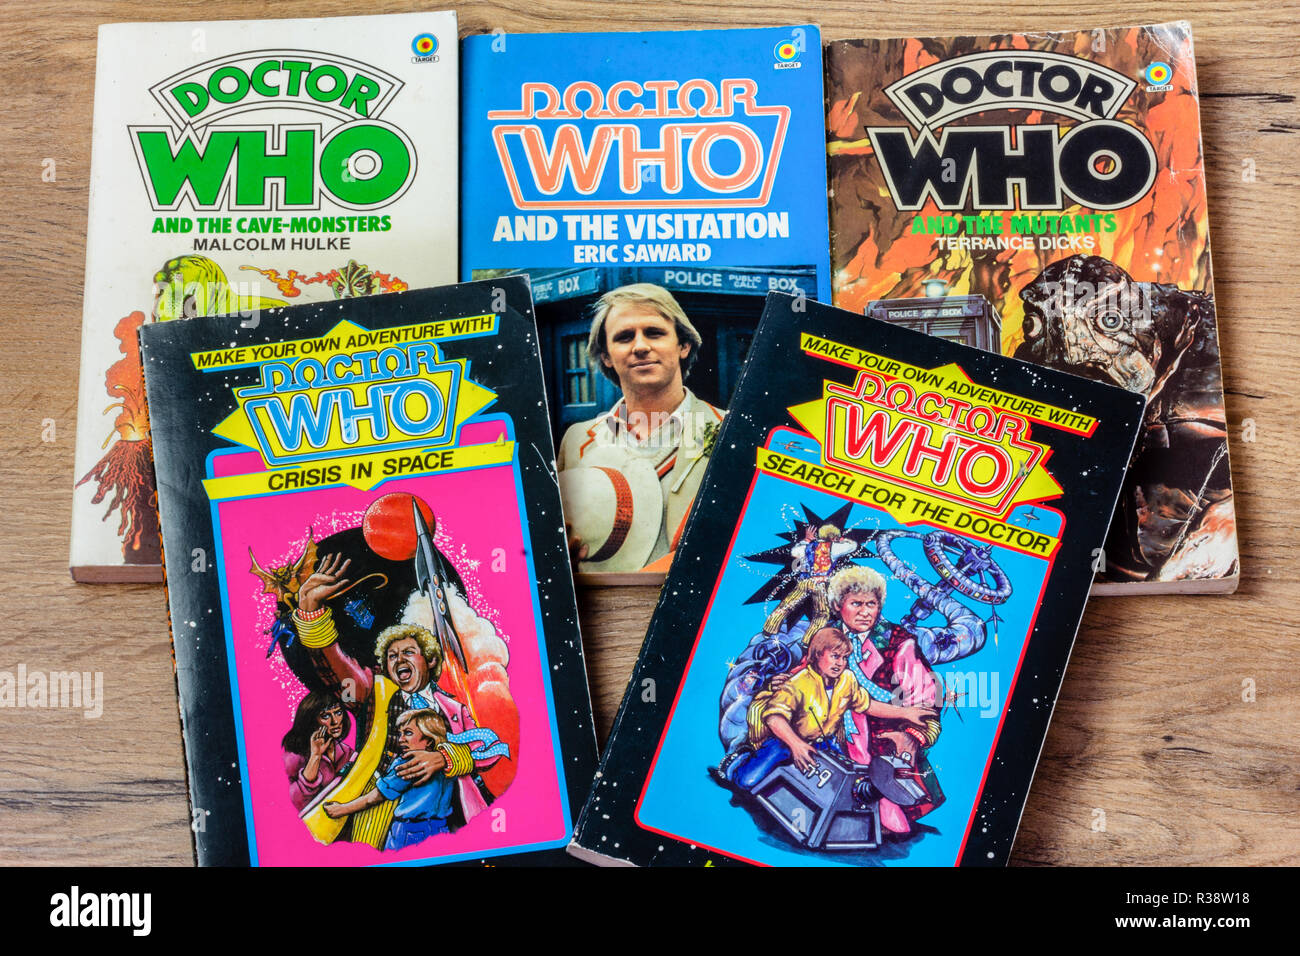 Collection of BBC Dr Who vintage collectable books, featuring Tom Baker, Colin Baker and Peter Davidson as The Doctor. Stock Photo